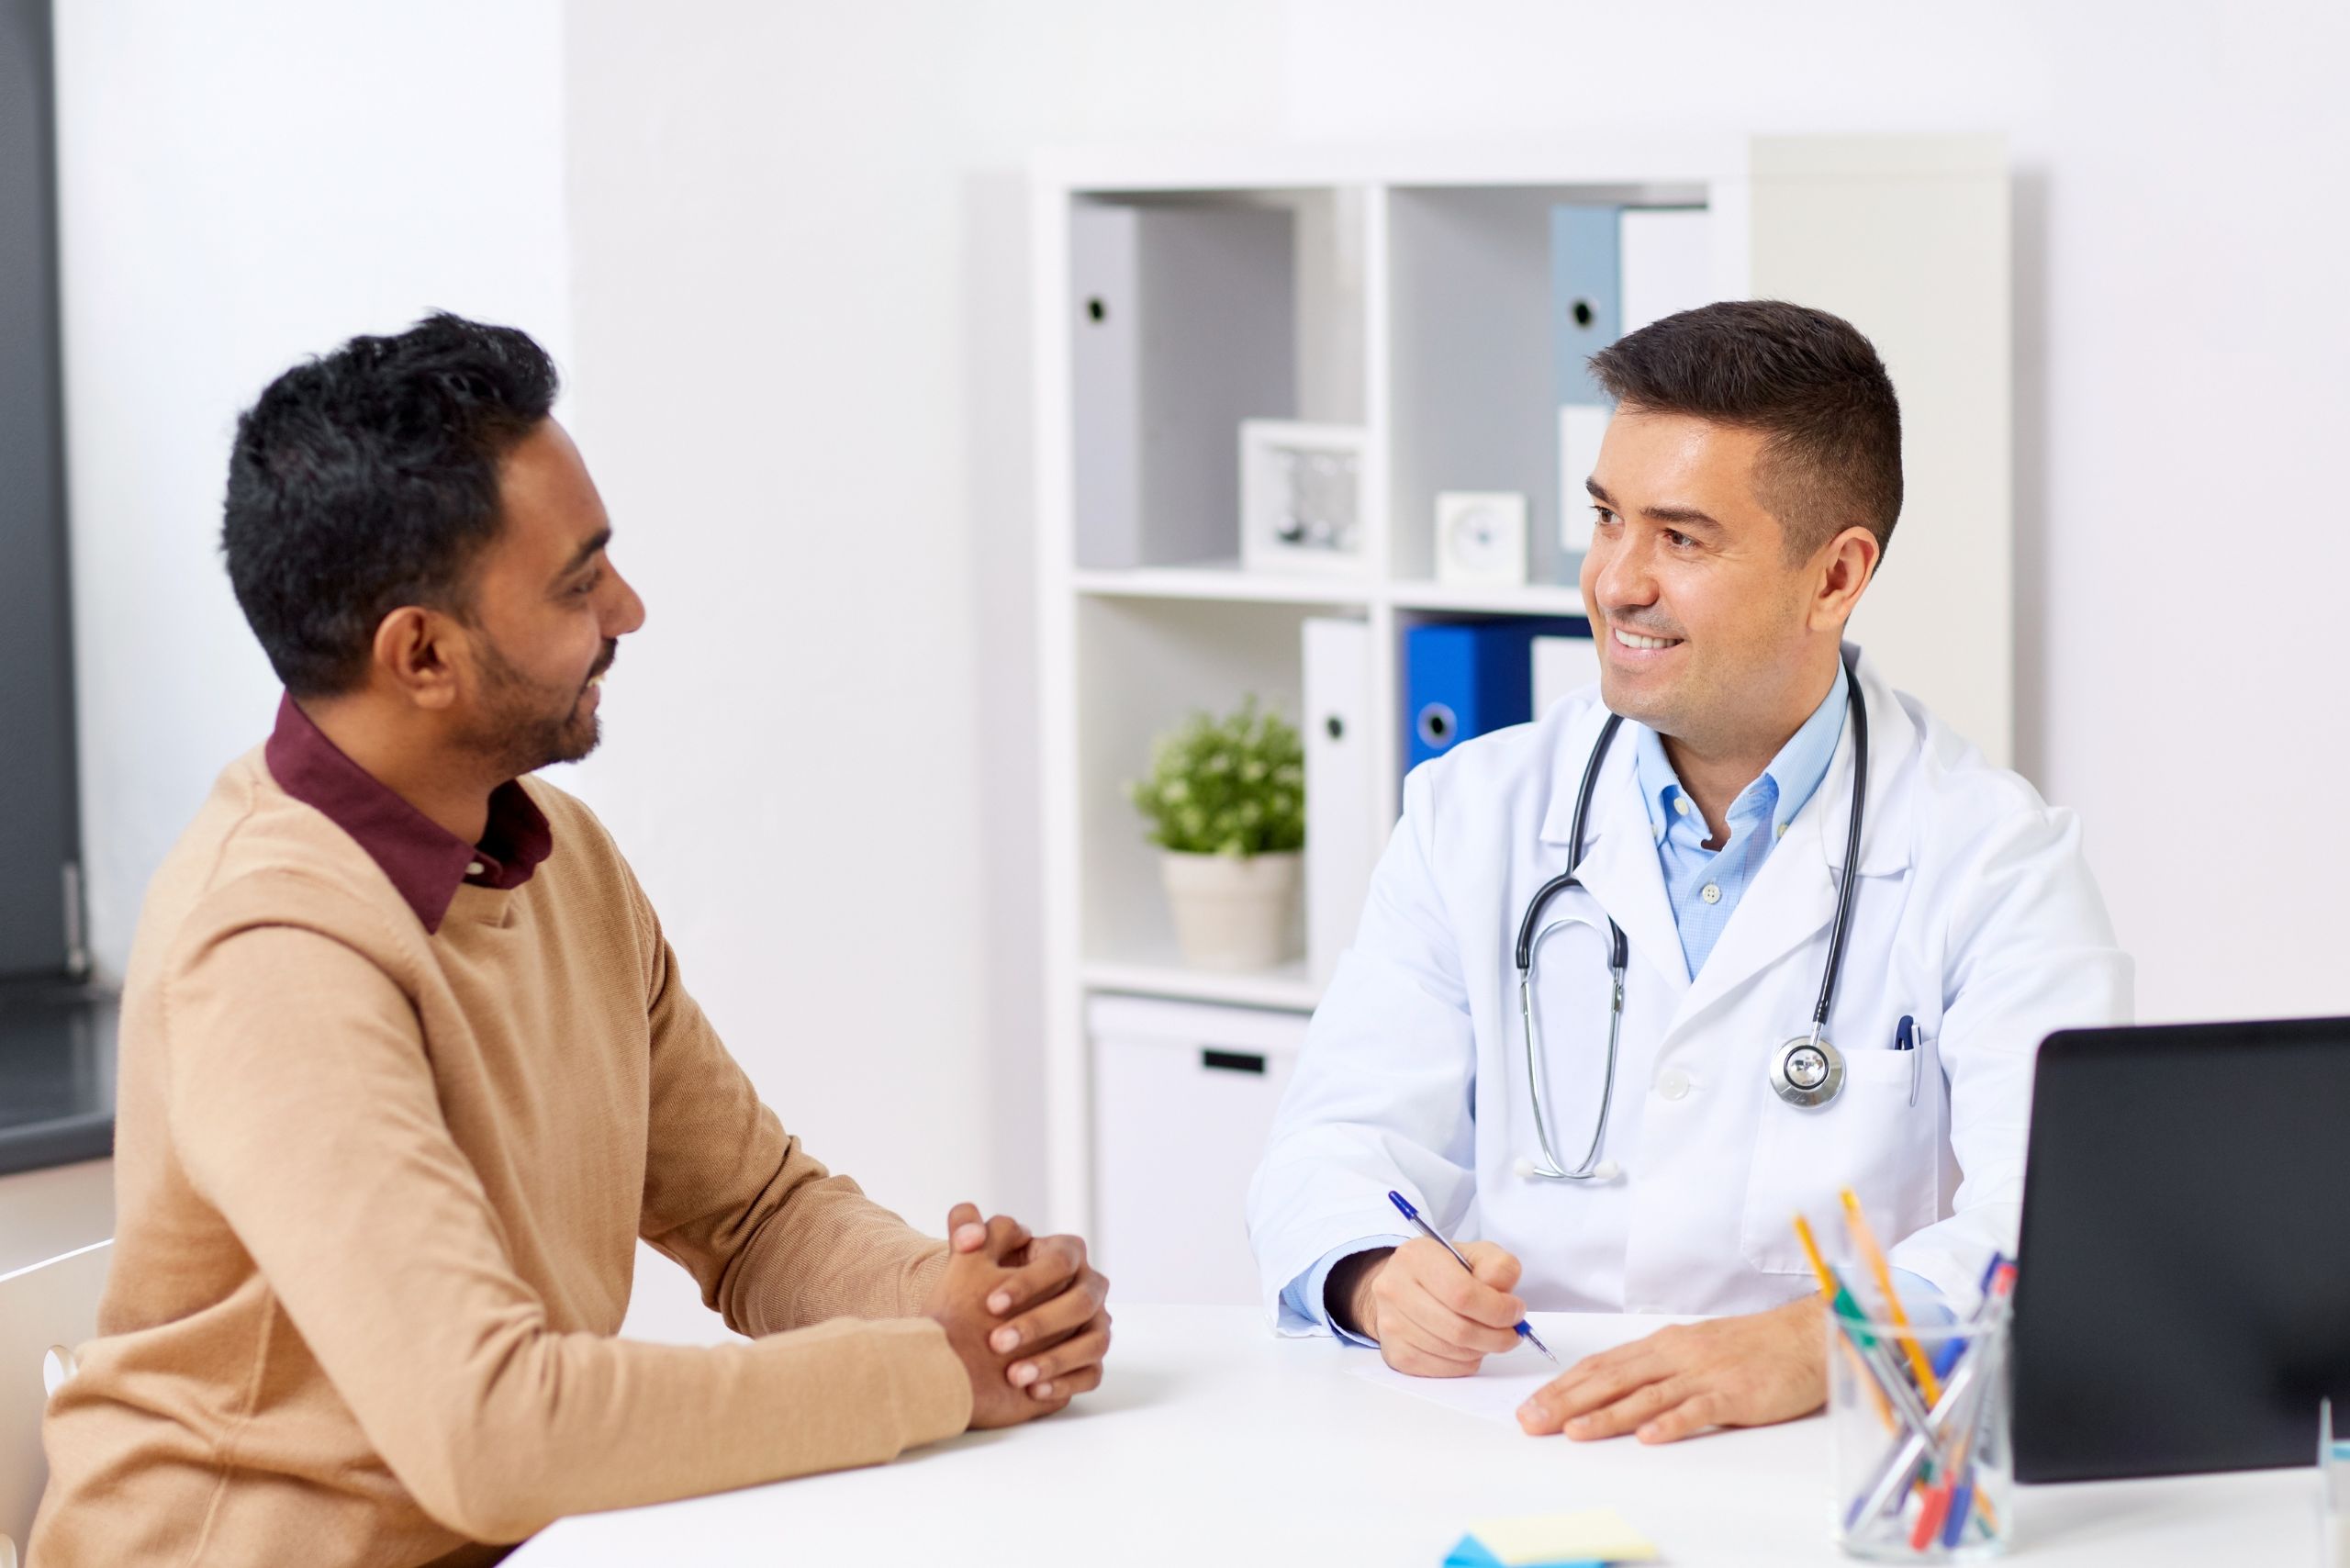 A doctor and patient engaged in conversation